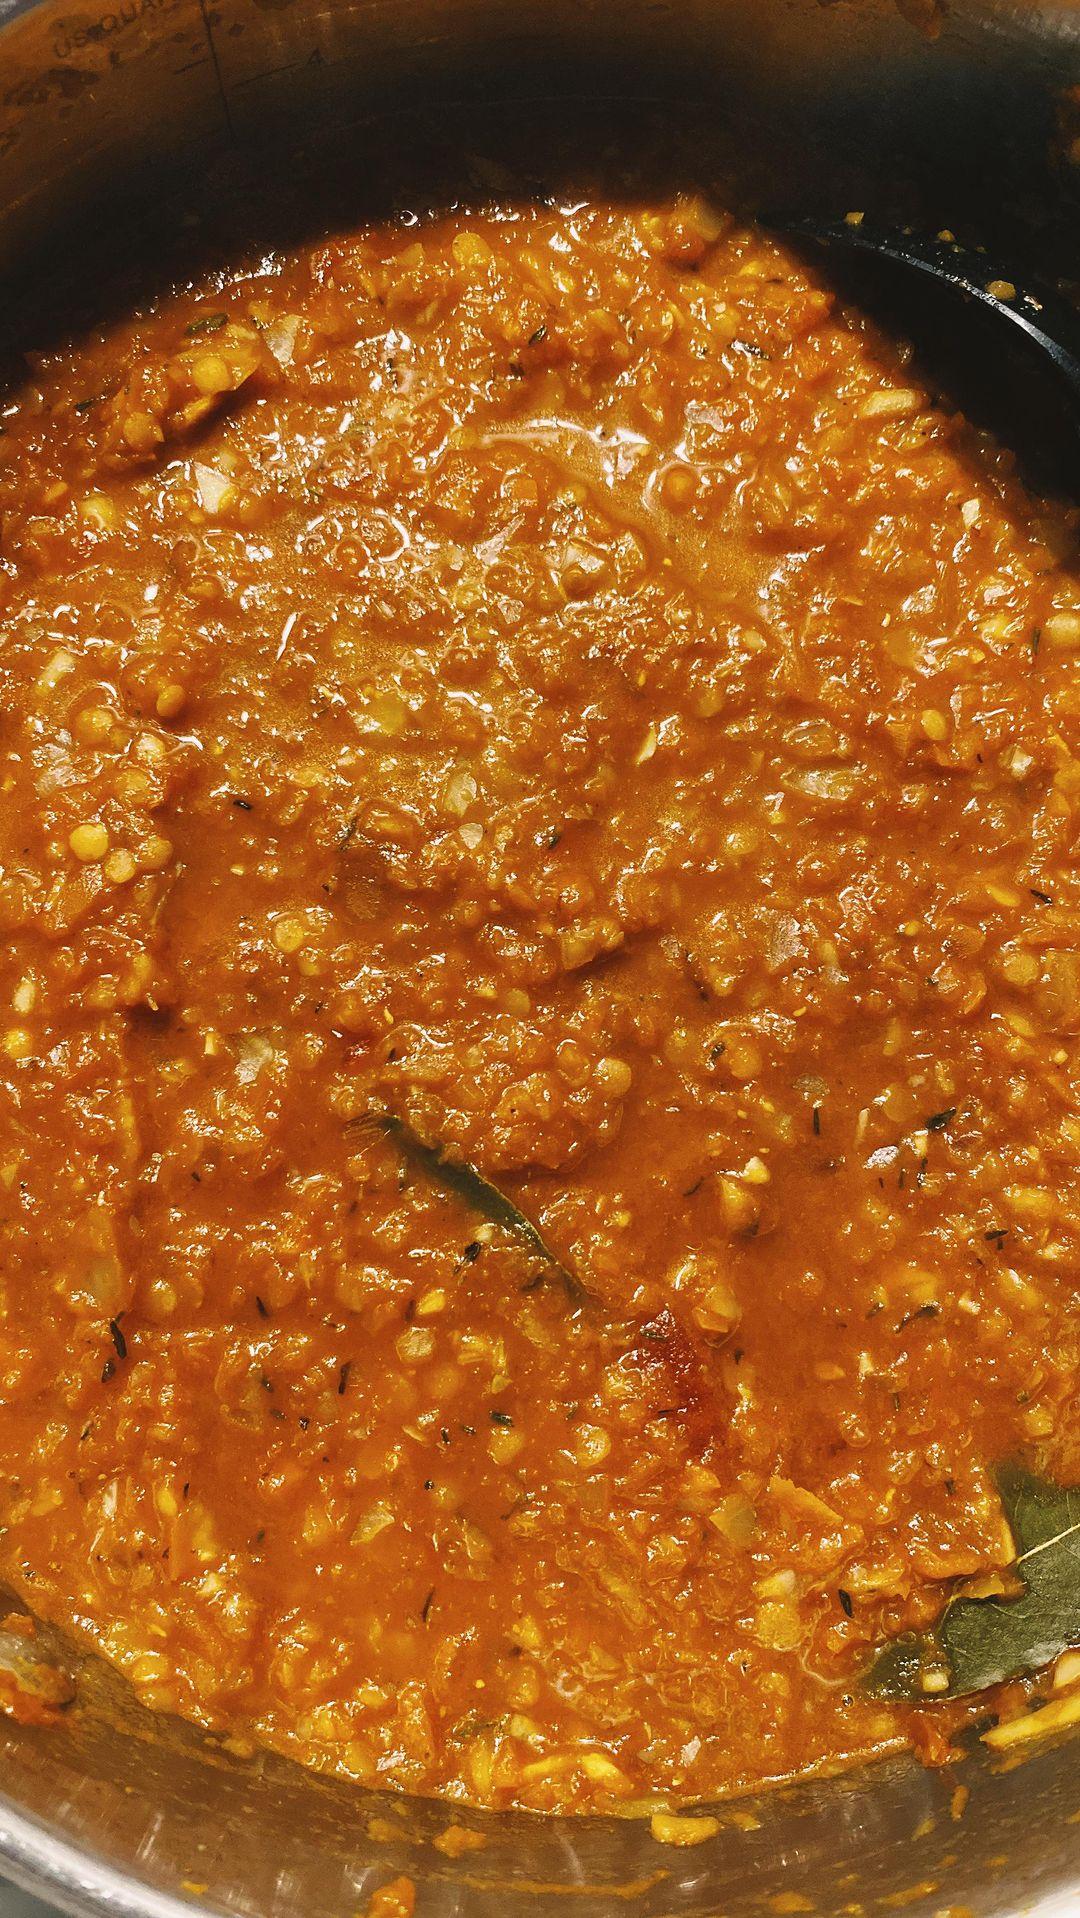 class="content__text"
 Veggie bolognese this evening 🍝♥️ You can basically add any vegetables to the mini chopper or food processor and hide it in the sauce. Great way to get rid of any sad vegetables that needs to be used 🥒 
 